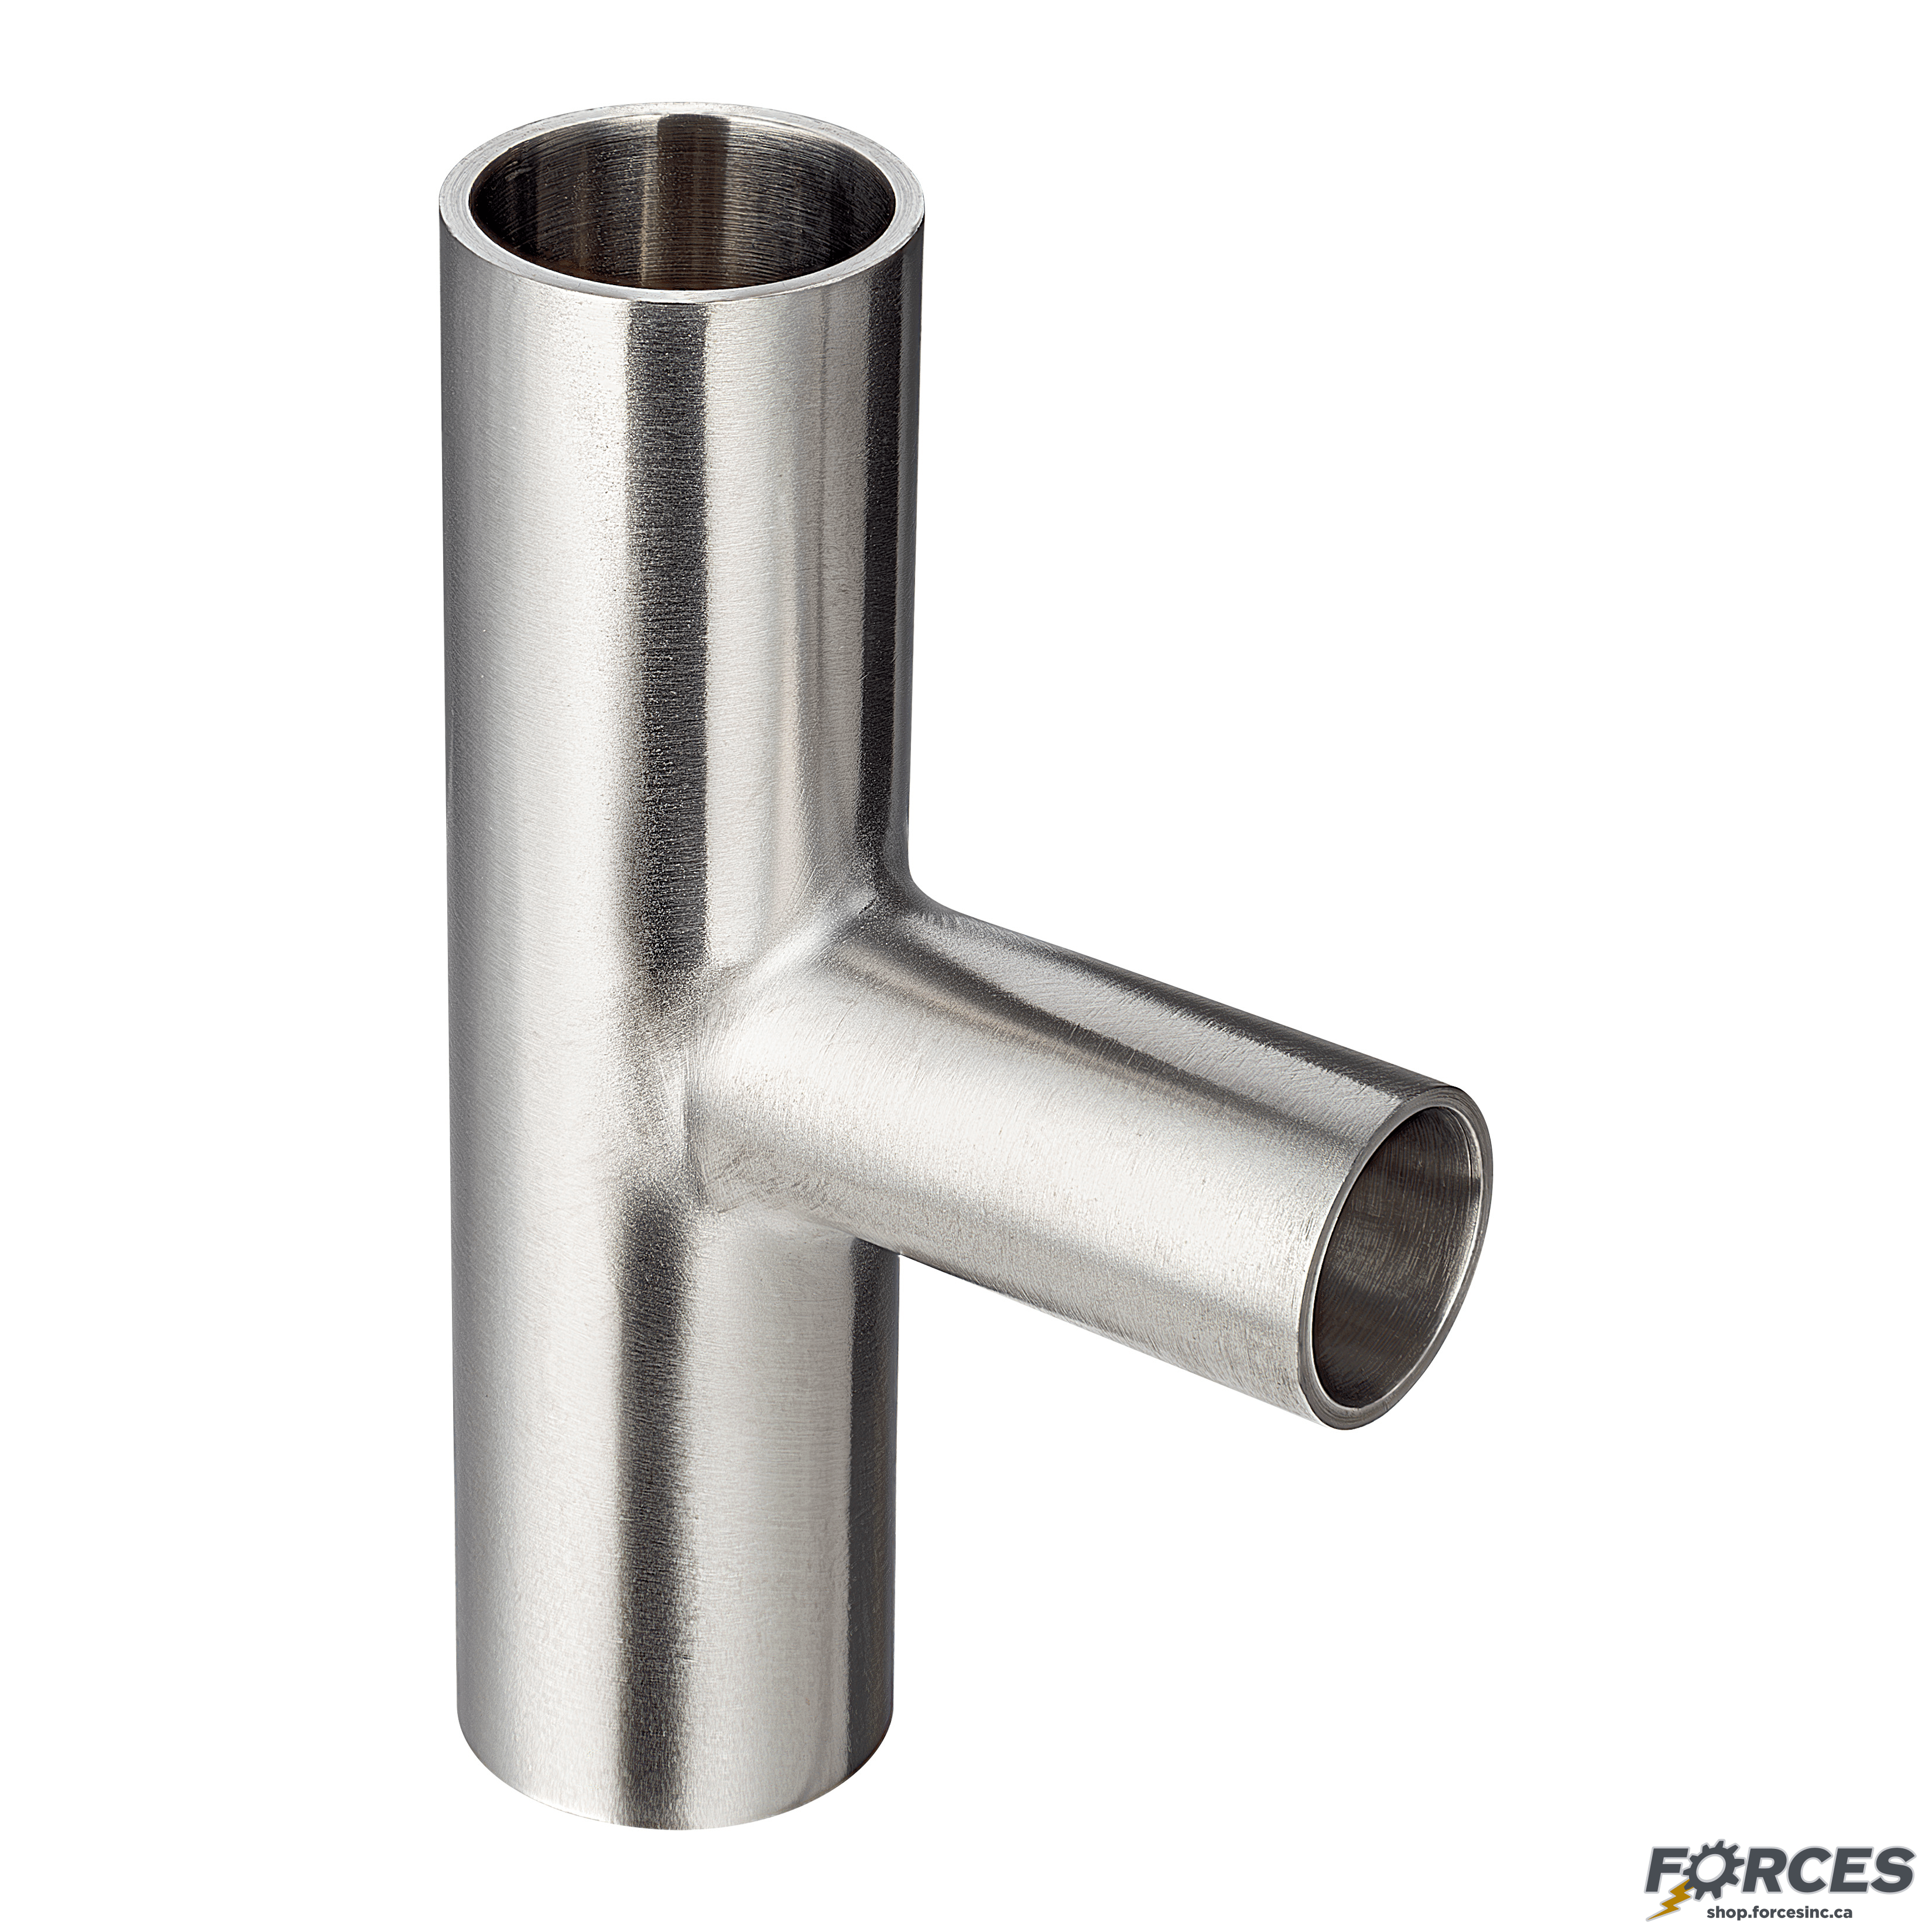 2" x 1-1/2" Butt Weld Tee Reducer - Stainless Steel 316 - Forces Inc